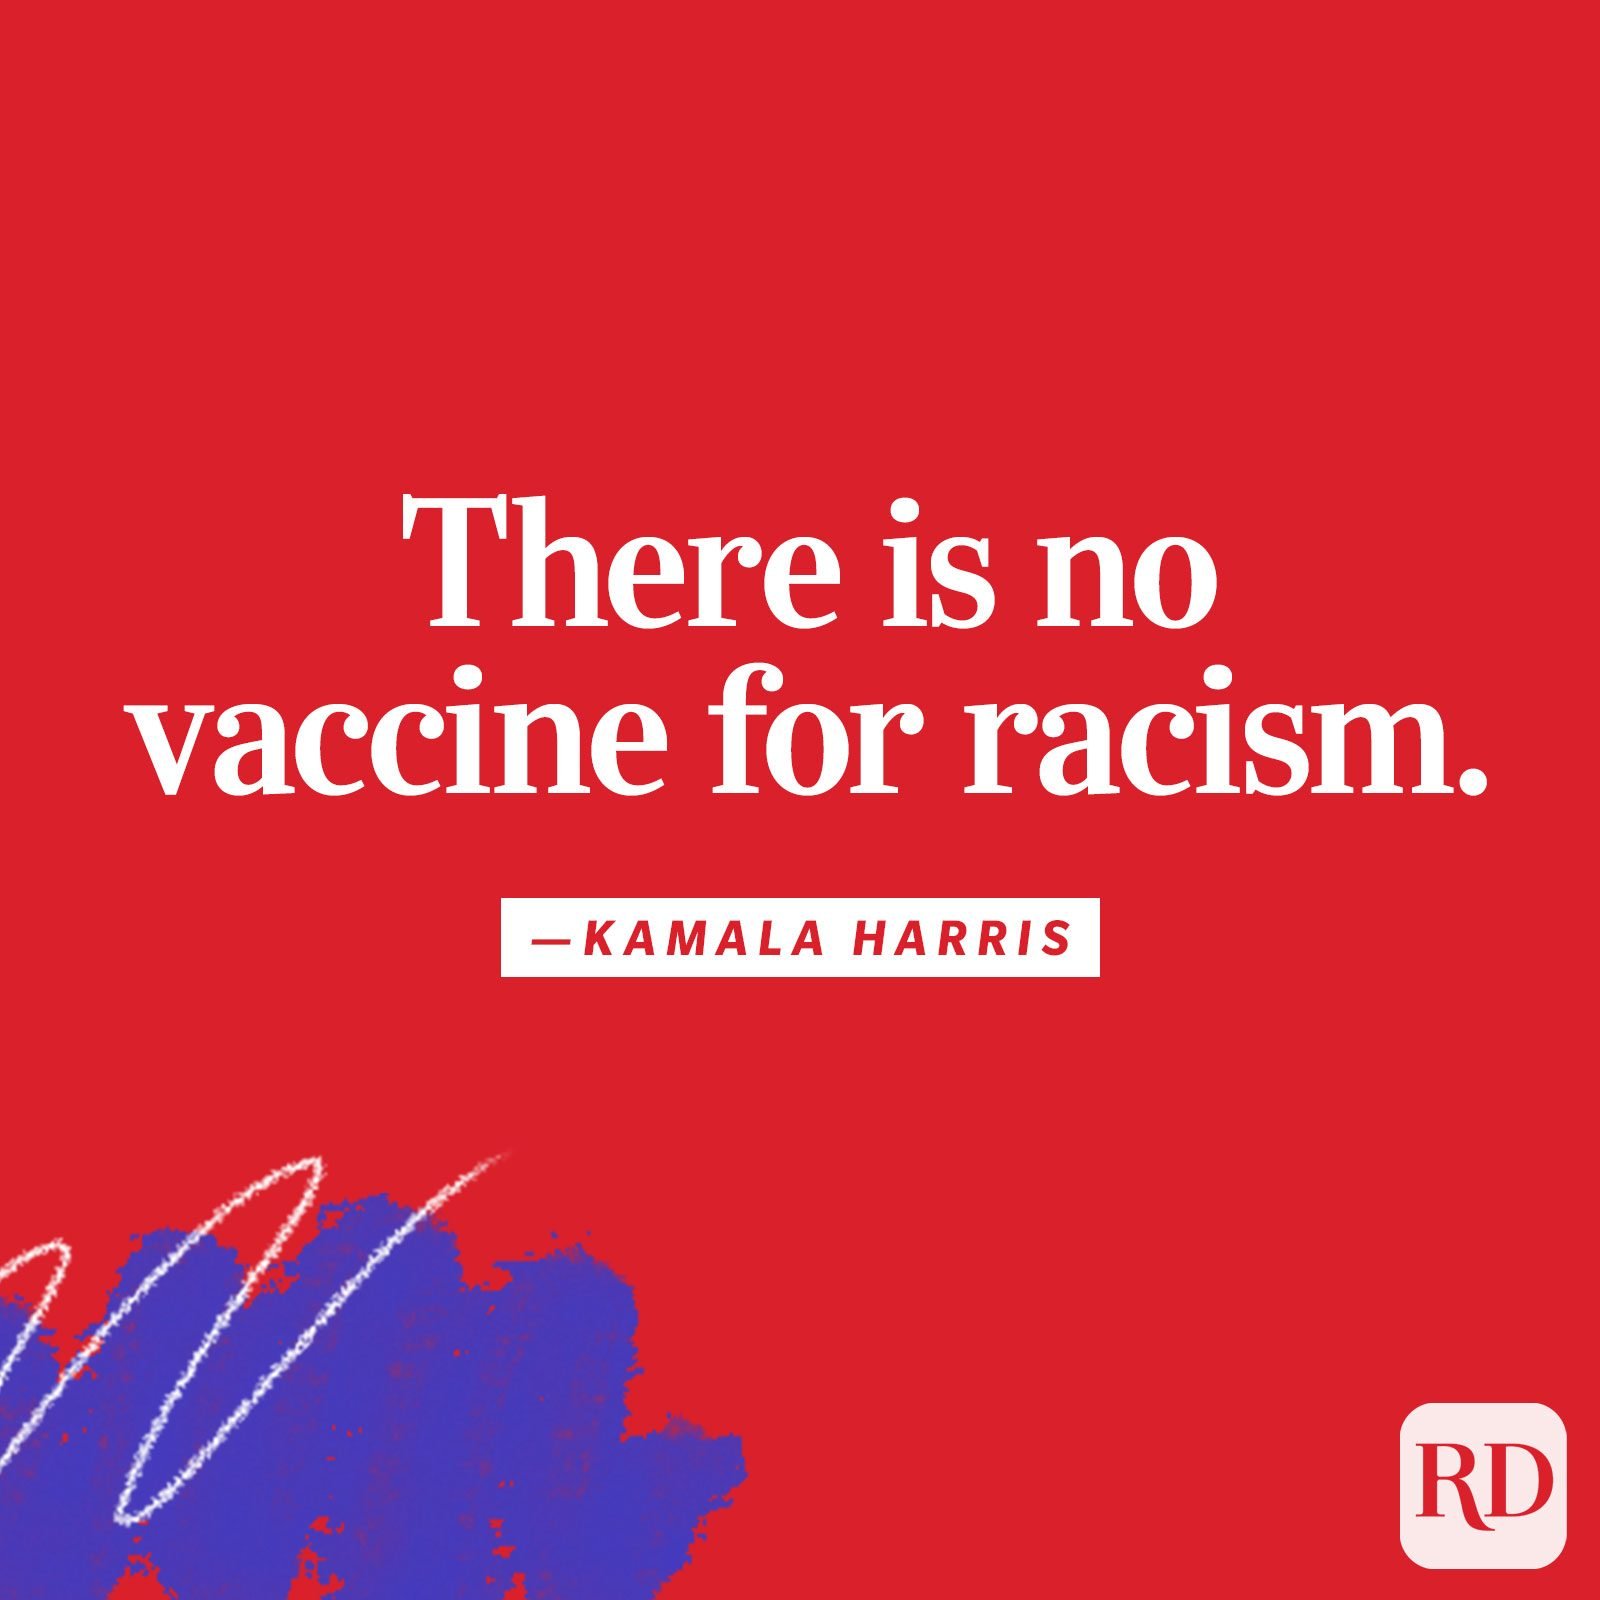 "There is no vaccine for racism."